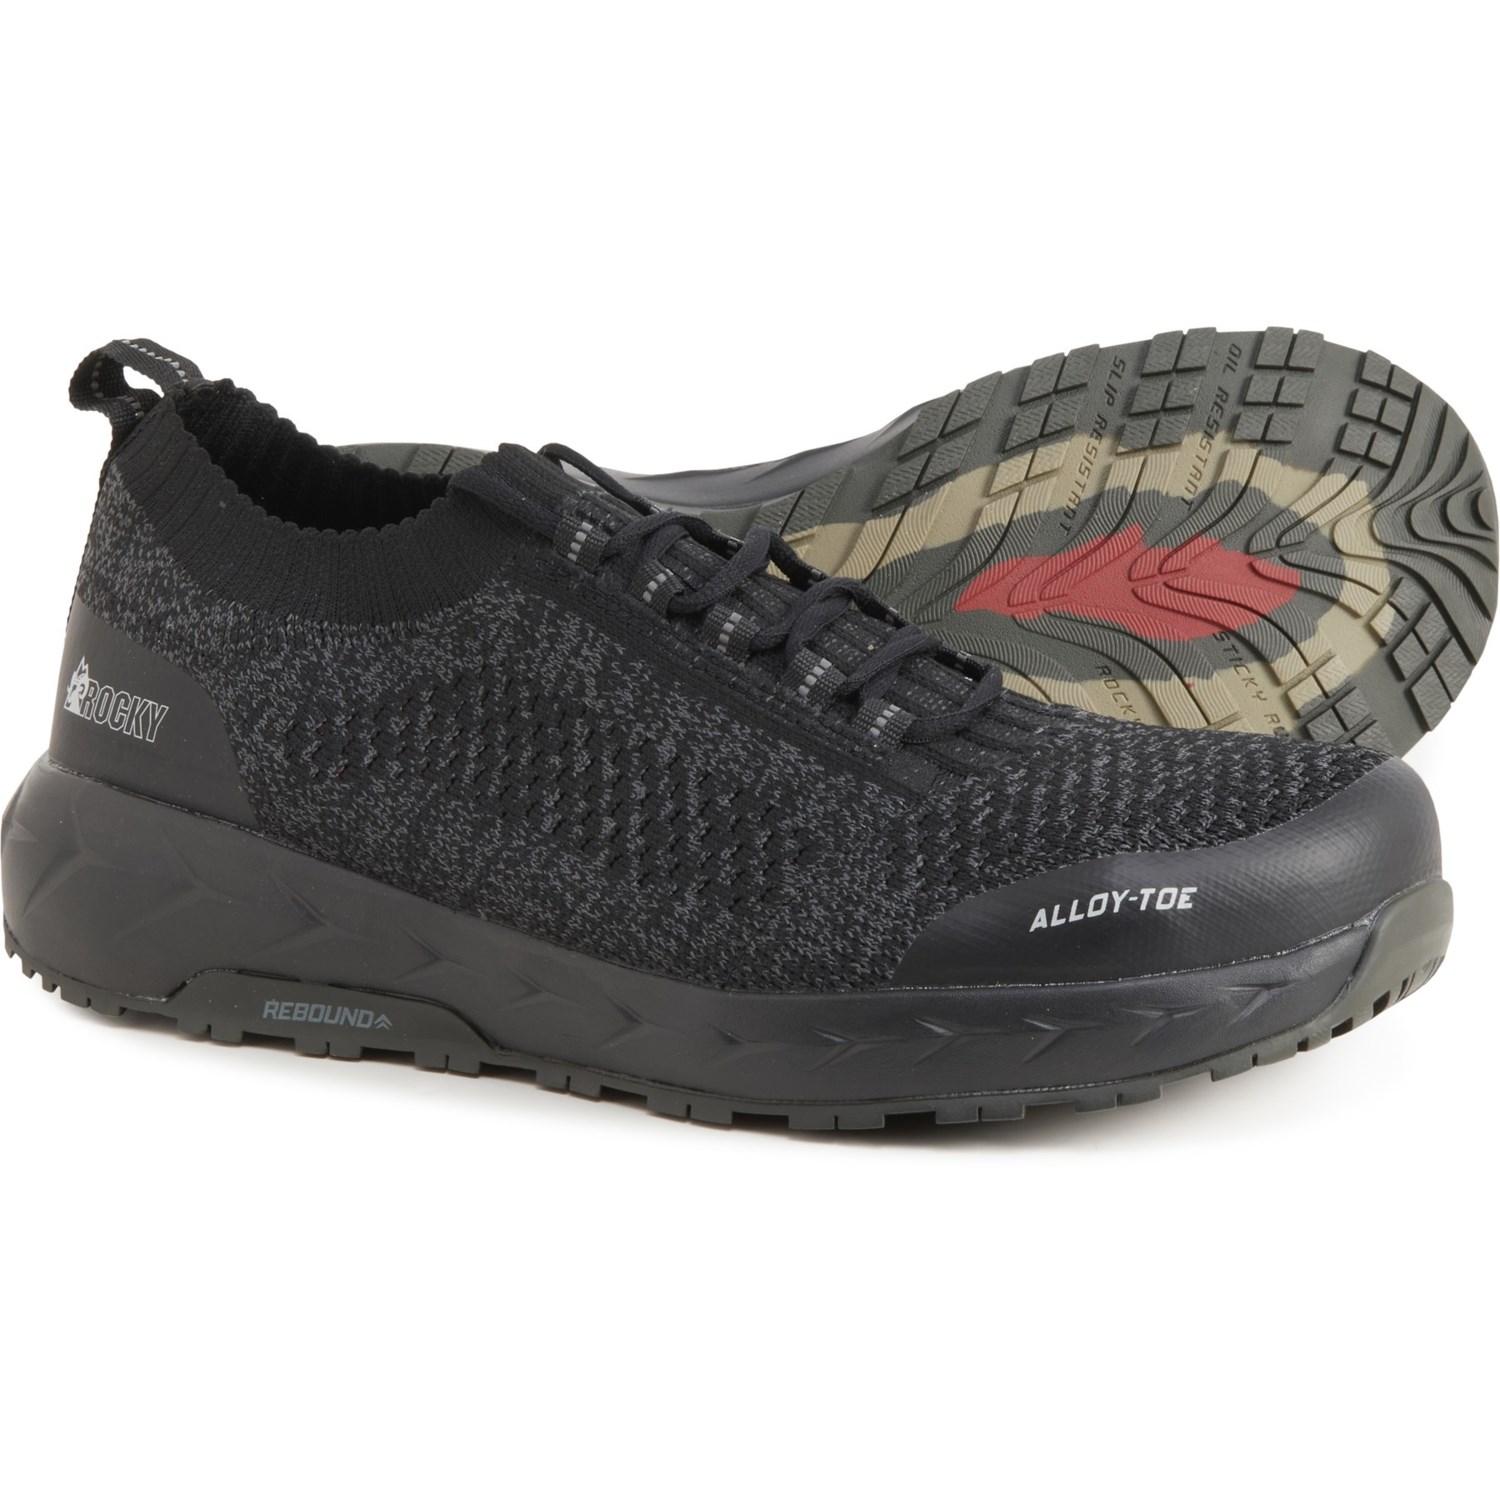 Rocky WorkKnit LX Athletic Work Shoes - Alloy Safety Toe (For Men)